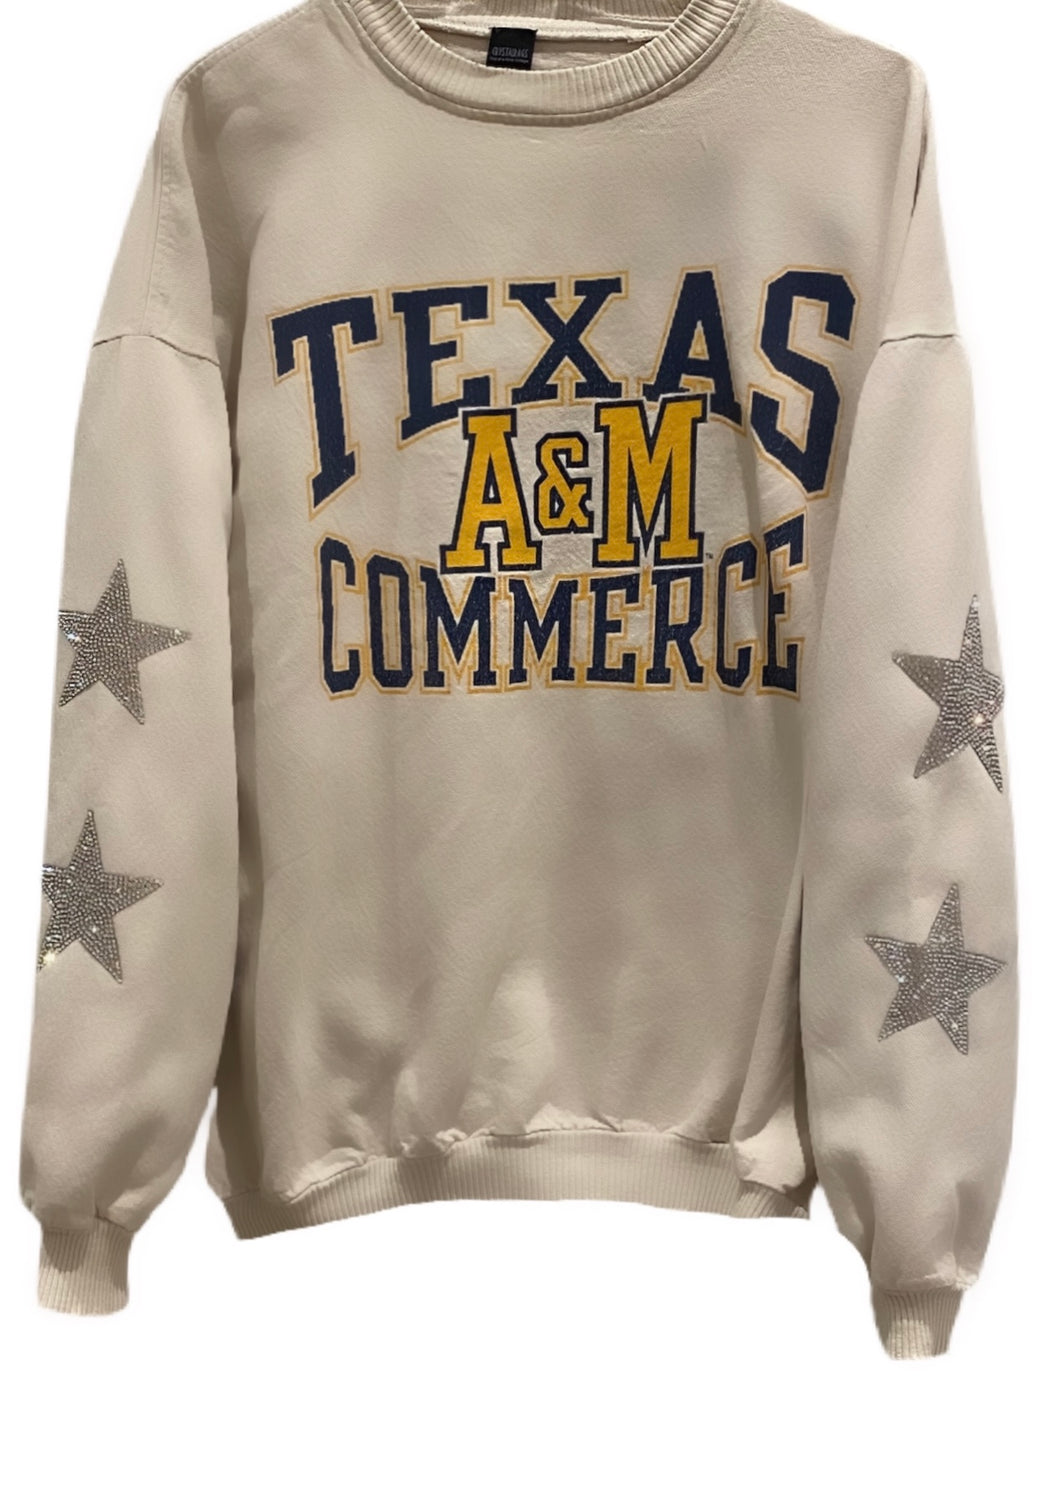 Texas A&M Commerce, One of a KIND Vintage Sweatshirt with Crystal Star Design